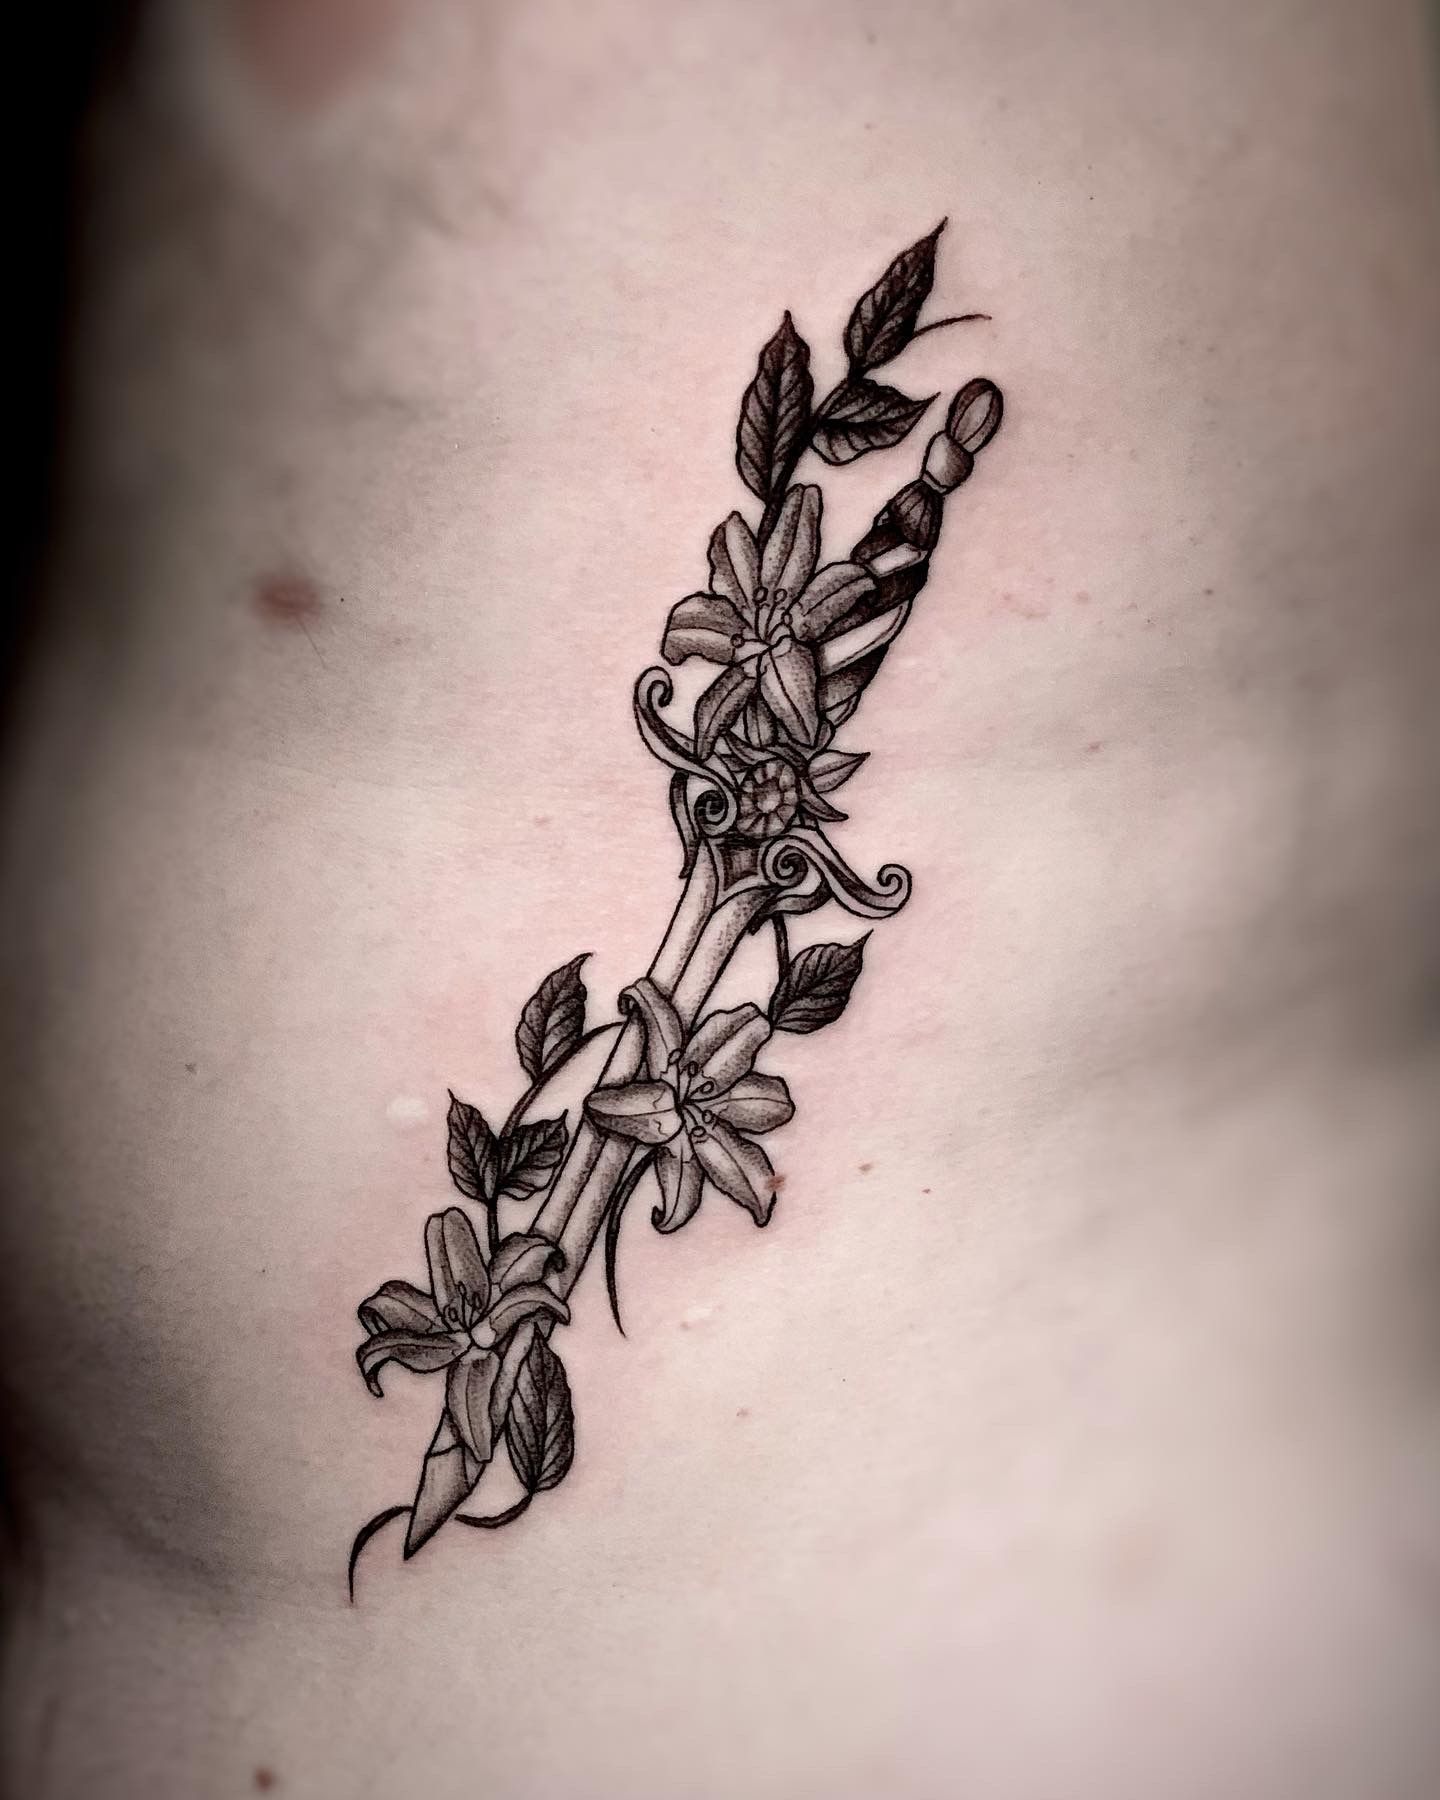 Inkscool Tattoos - Gladiolus flower also know as the sword lily made on a  client. For making the tattoo, Syed Hamza Ali took reference from the  actual gladiolus flower, studied the texture